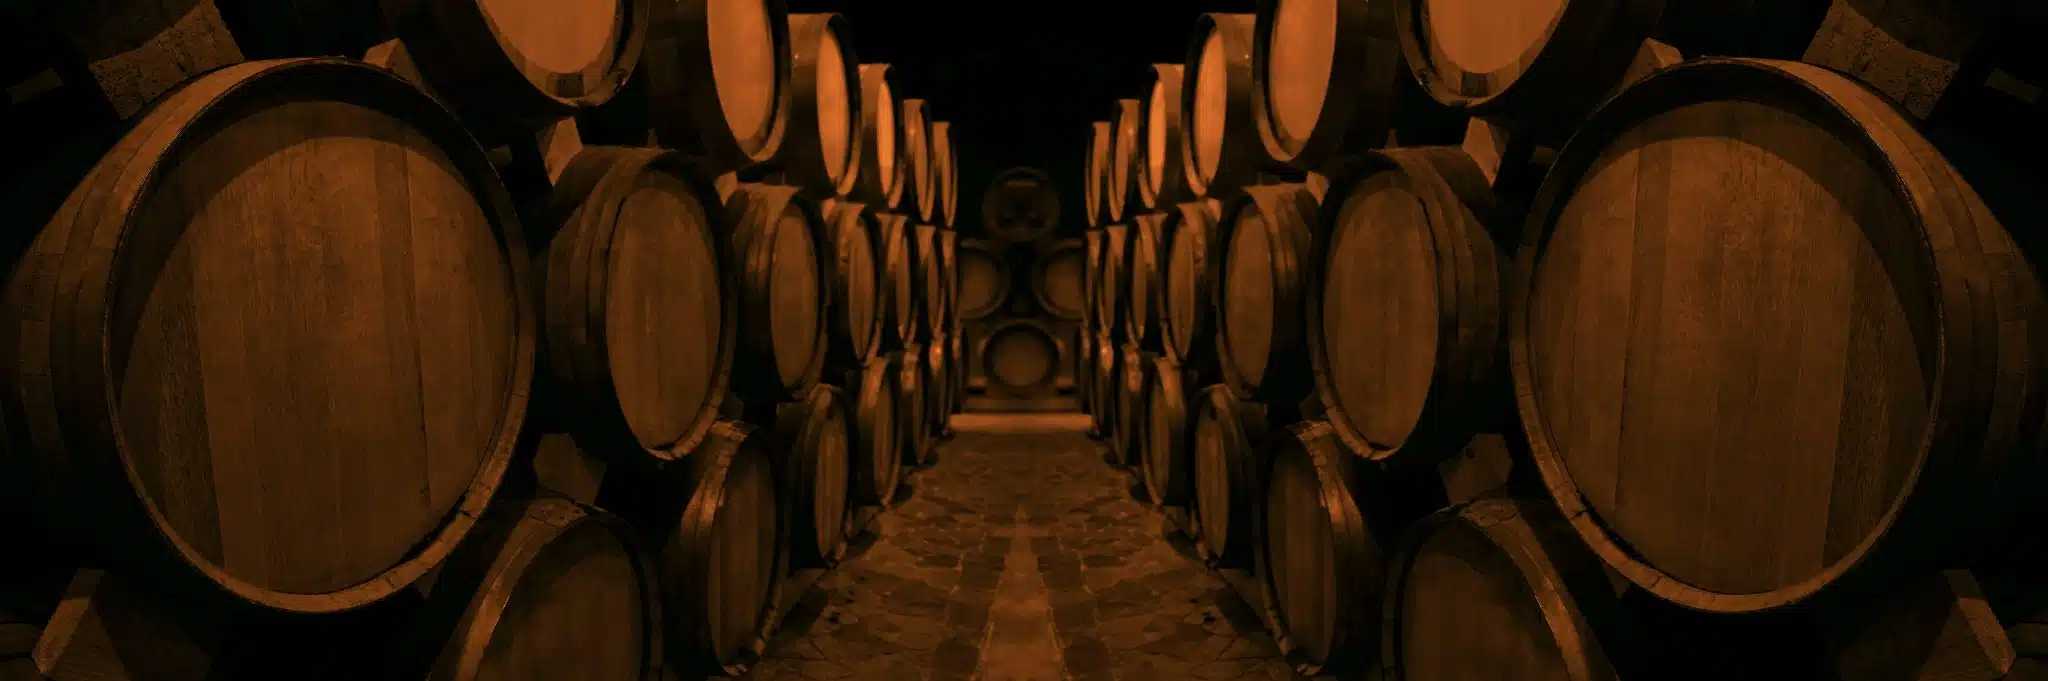 Wooden barrels lined up in a dark cellar, used for aging brandy.